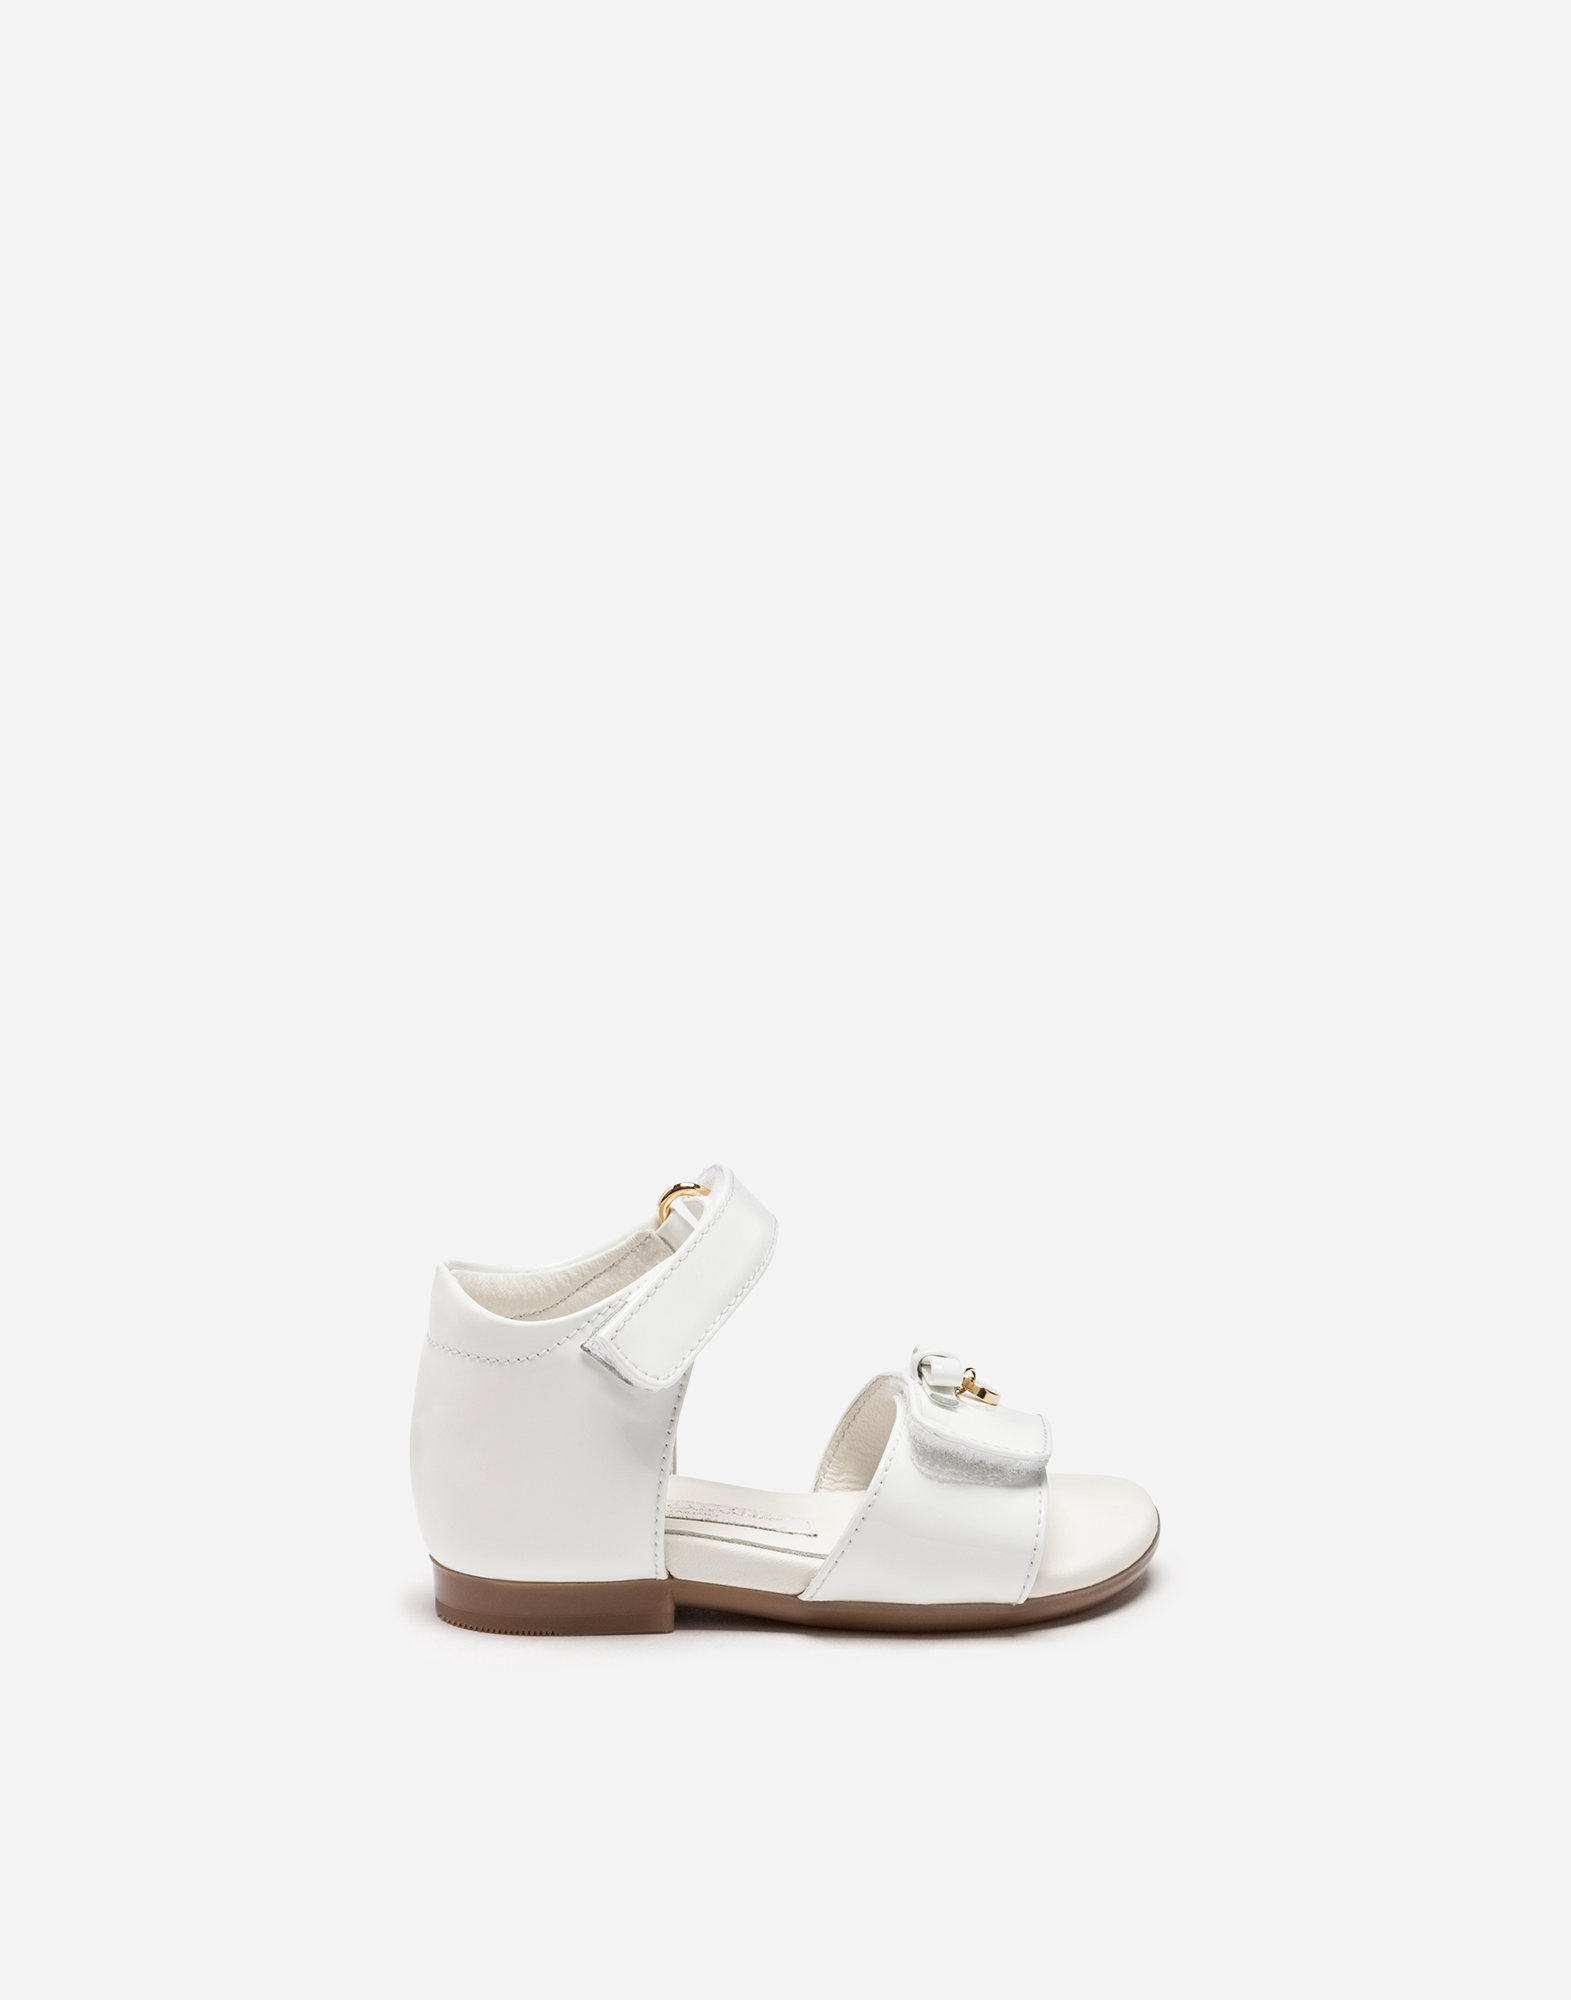 Dolce & Gabbana Babies' First Steps Sandals In Patent Leather With Bow In White